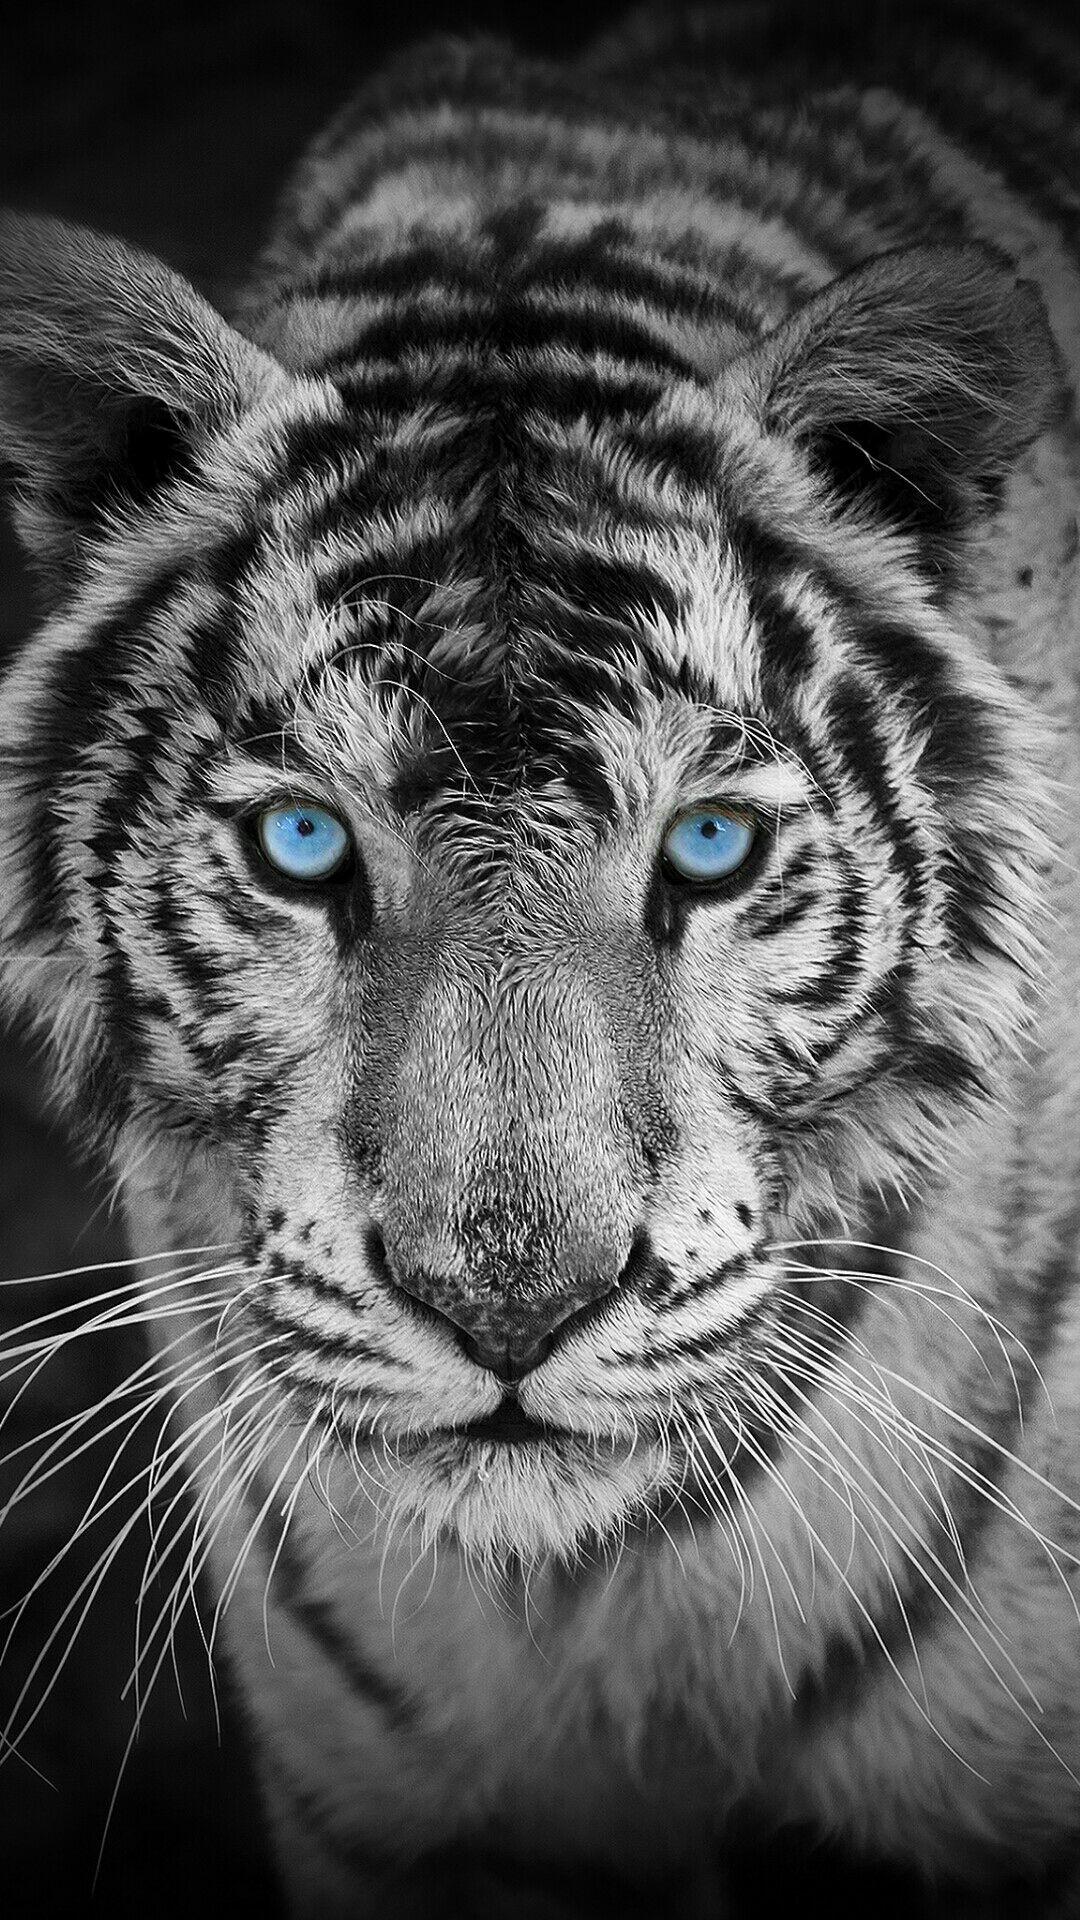 Tiger old mobile cell phone smartphone wallpapers hd desktop backgrounds  240x320 images and pictures